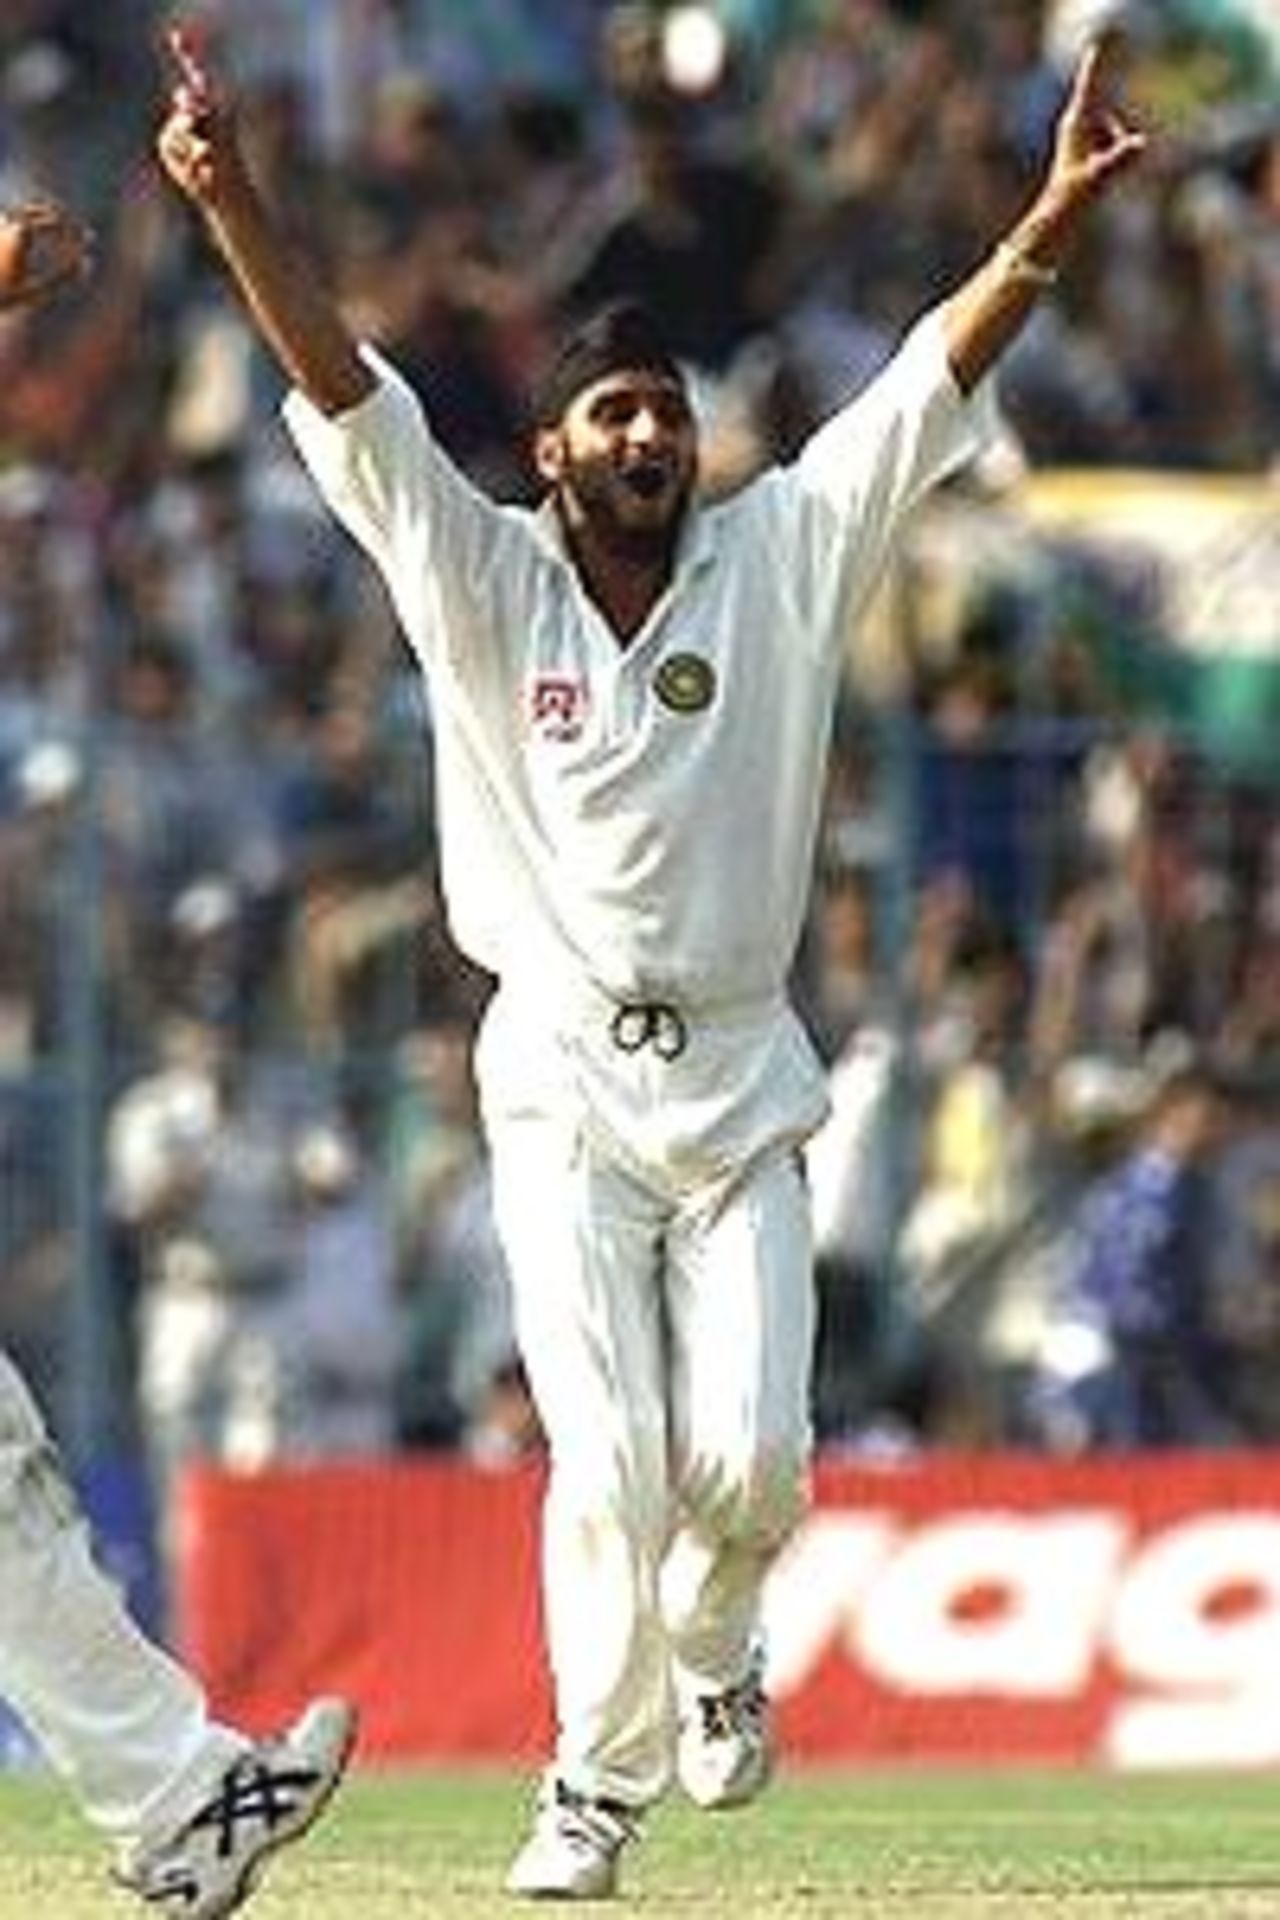 Harbhajan Singh of India claims the wicket of Adam Gilchrist of Australia, the second wicket of a hat trick, during day one of the 2nd Test between India and Australia played at Eden Gardens, Calcutta, India.